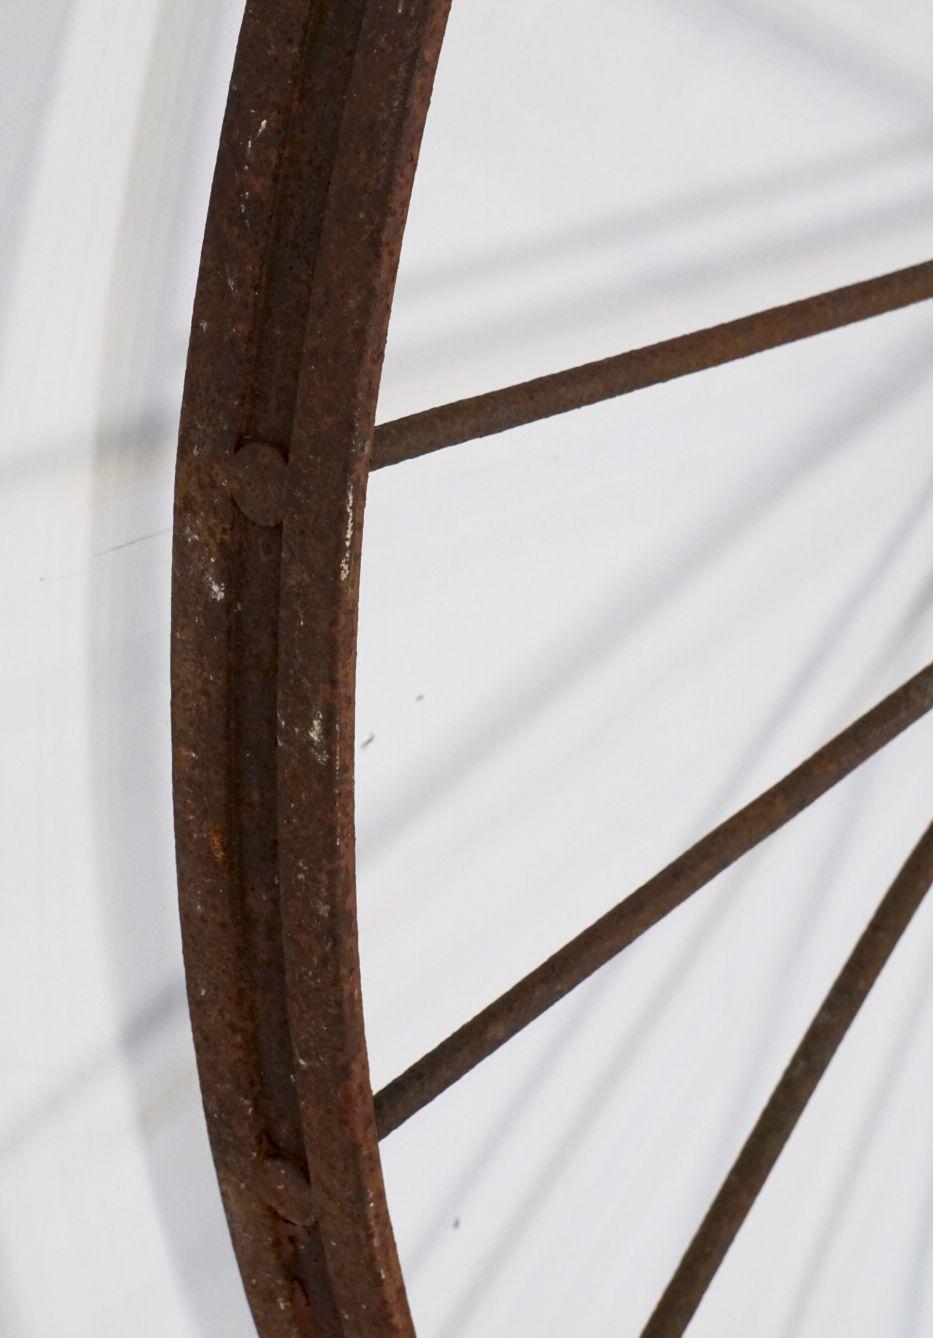 Large English Spoked Cart or Wagon Wheel of Iron from the 19th Century (Dia 54) For Sale 1